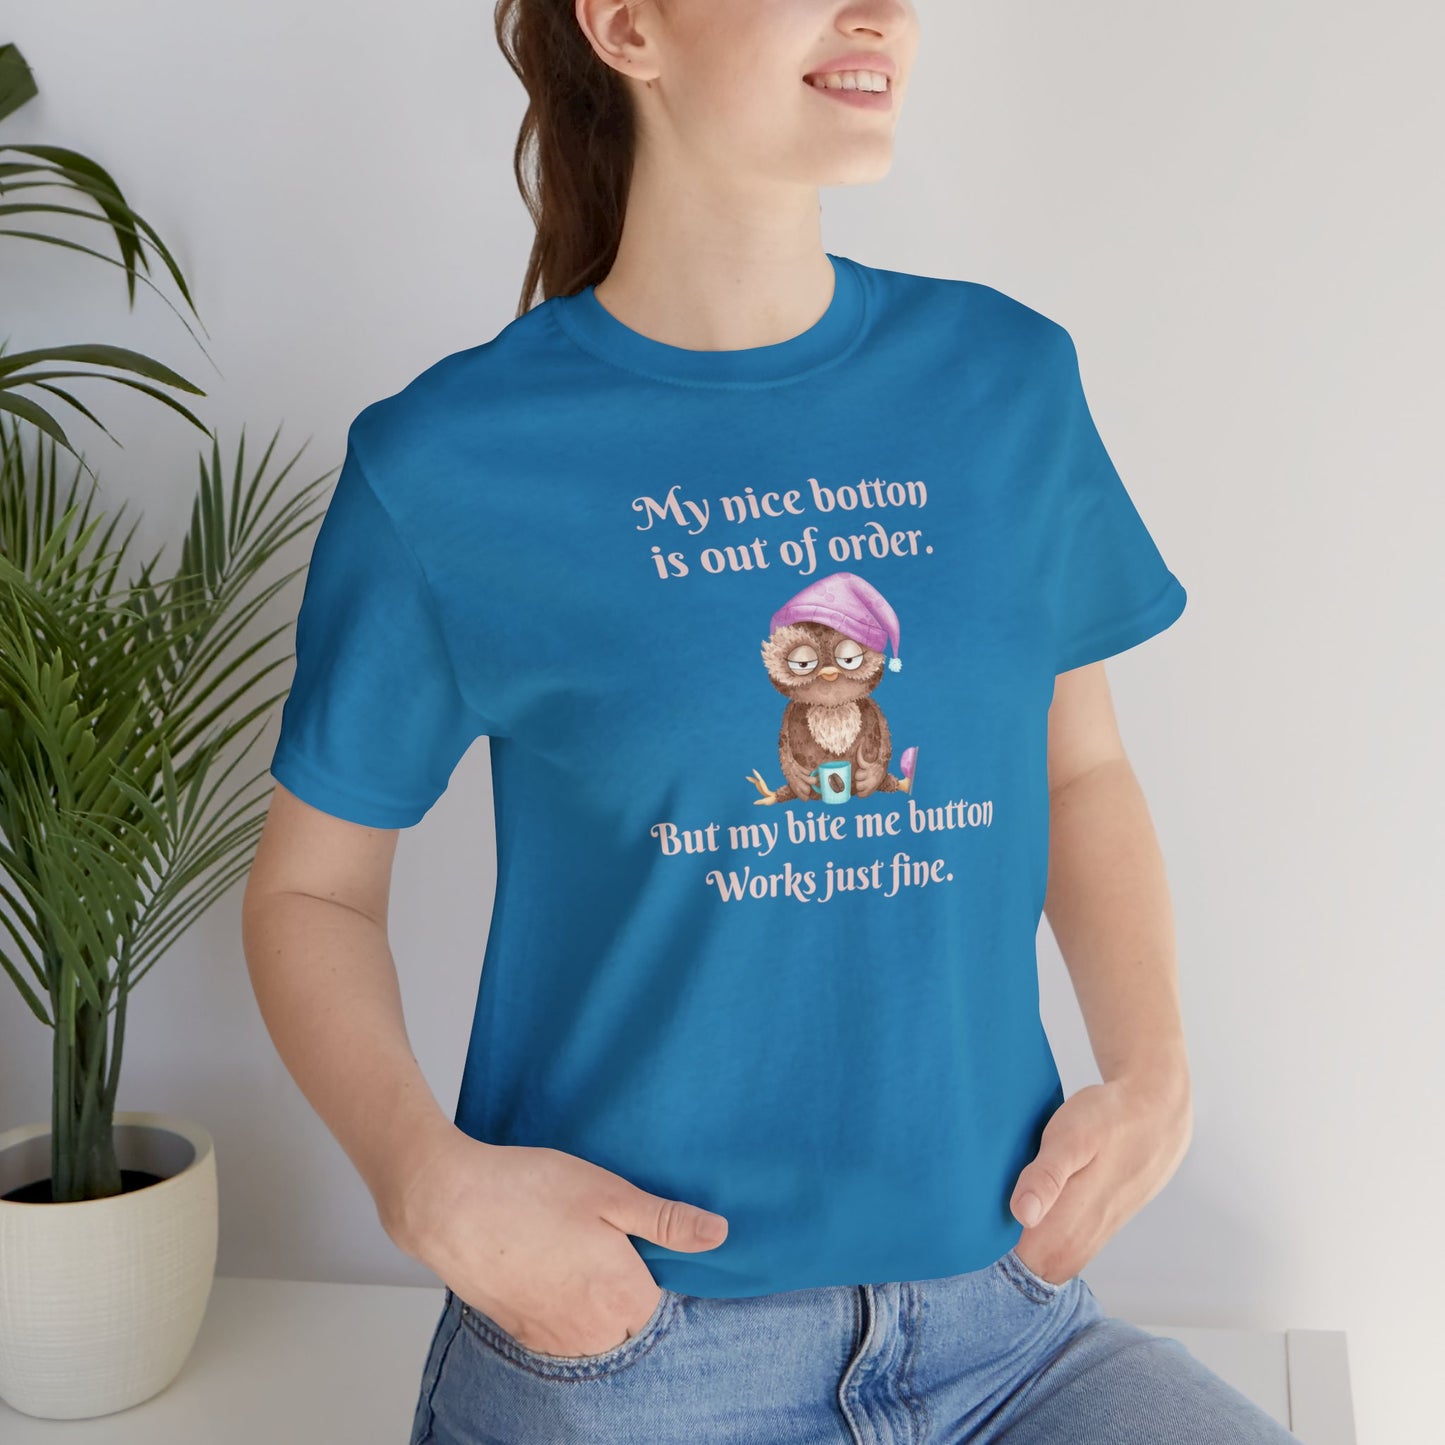 My nice button is out of order, but my bite me button works just fine. Unisex shot sleeve tee